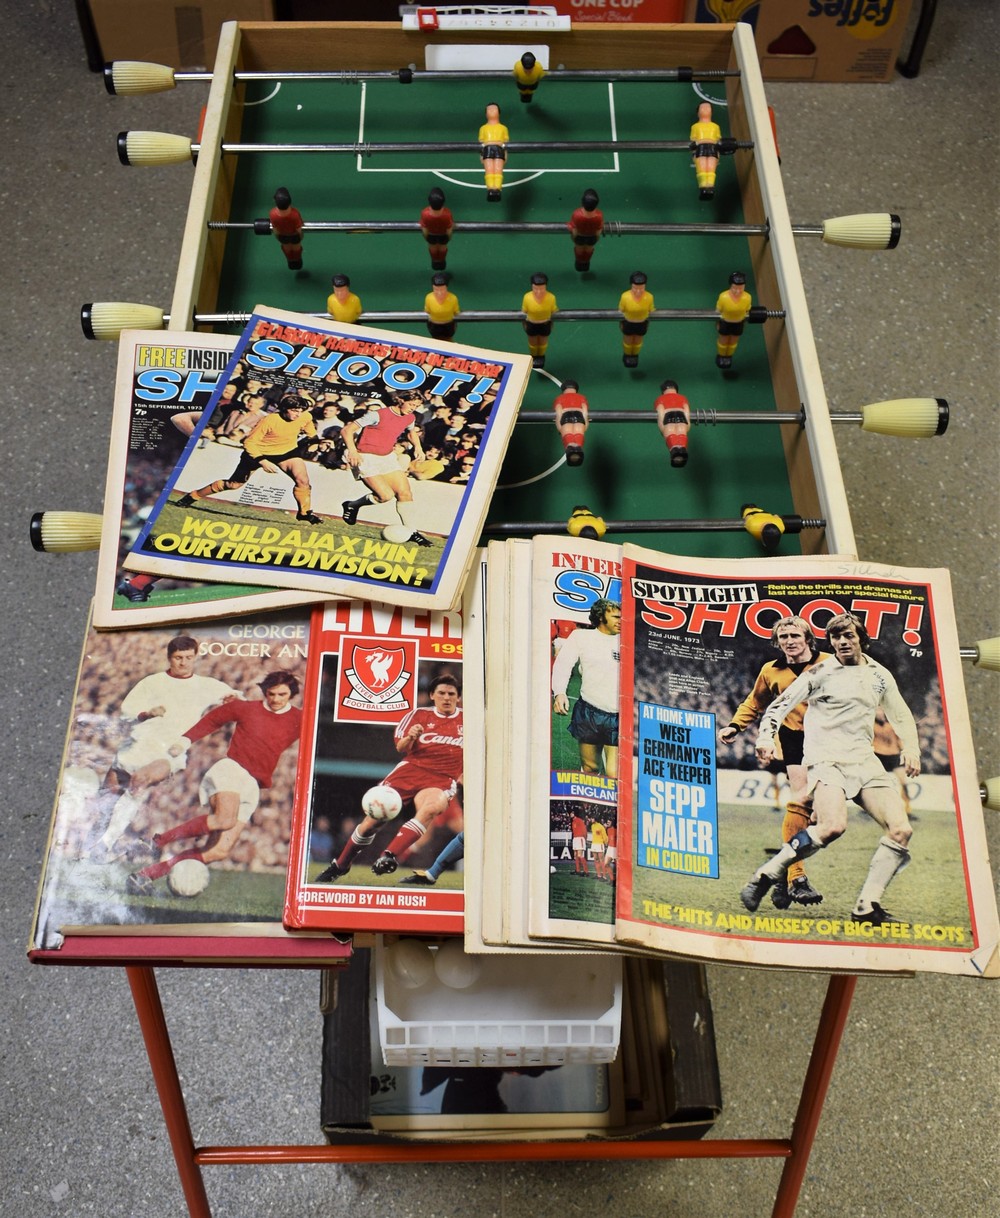 An Eria table football; Shoot magazines; George Best Soccer Annual; The Official Liverpool Annual,